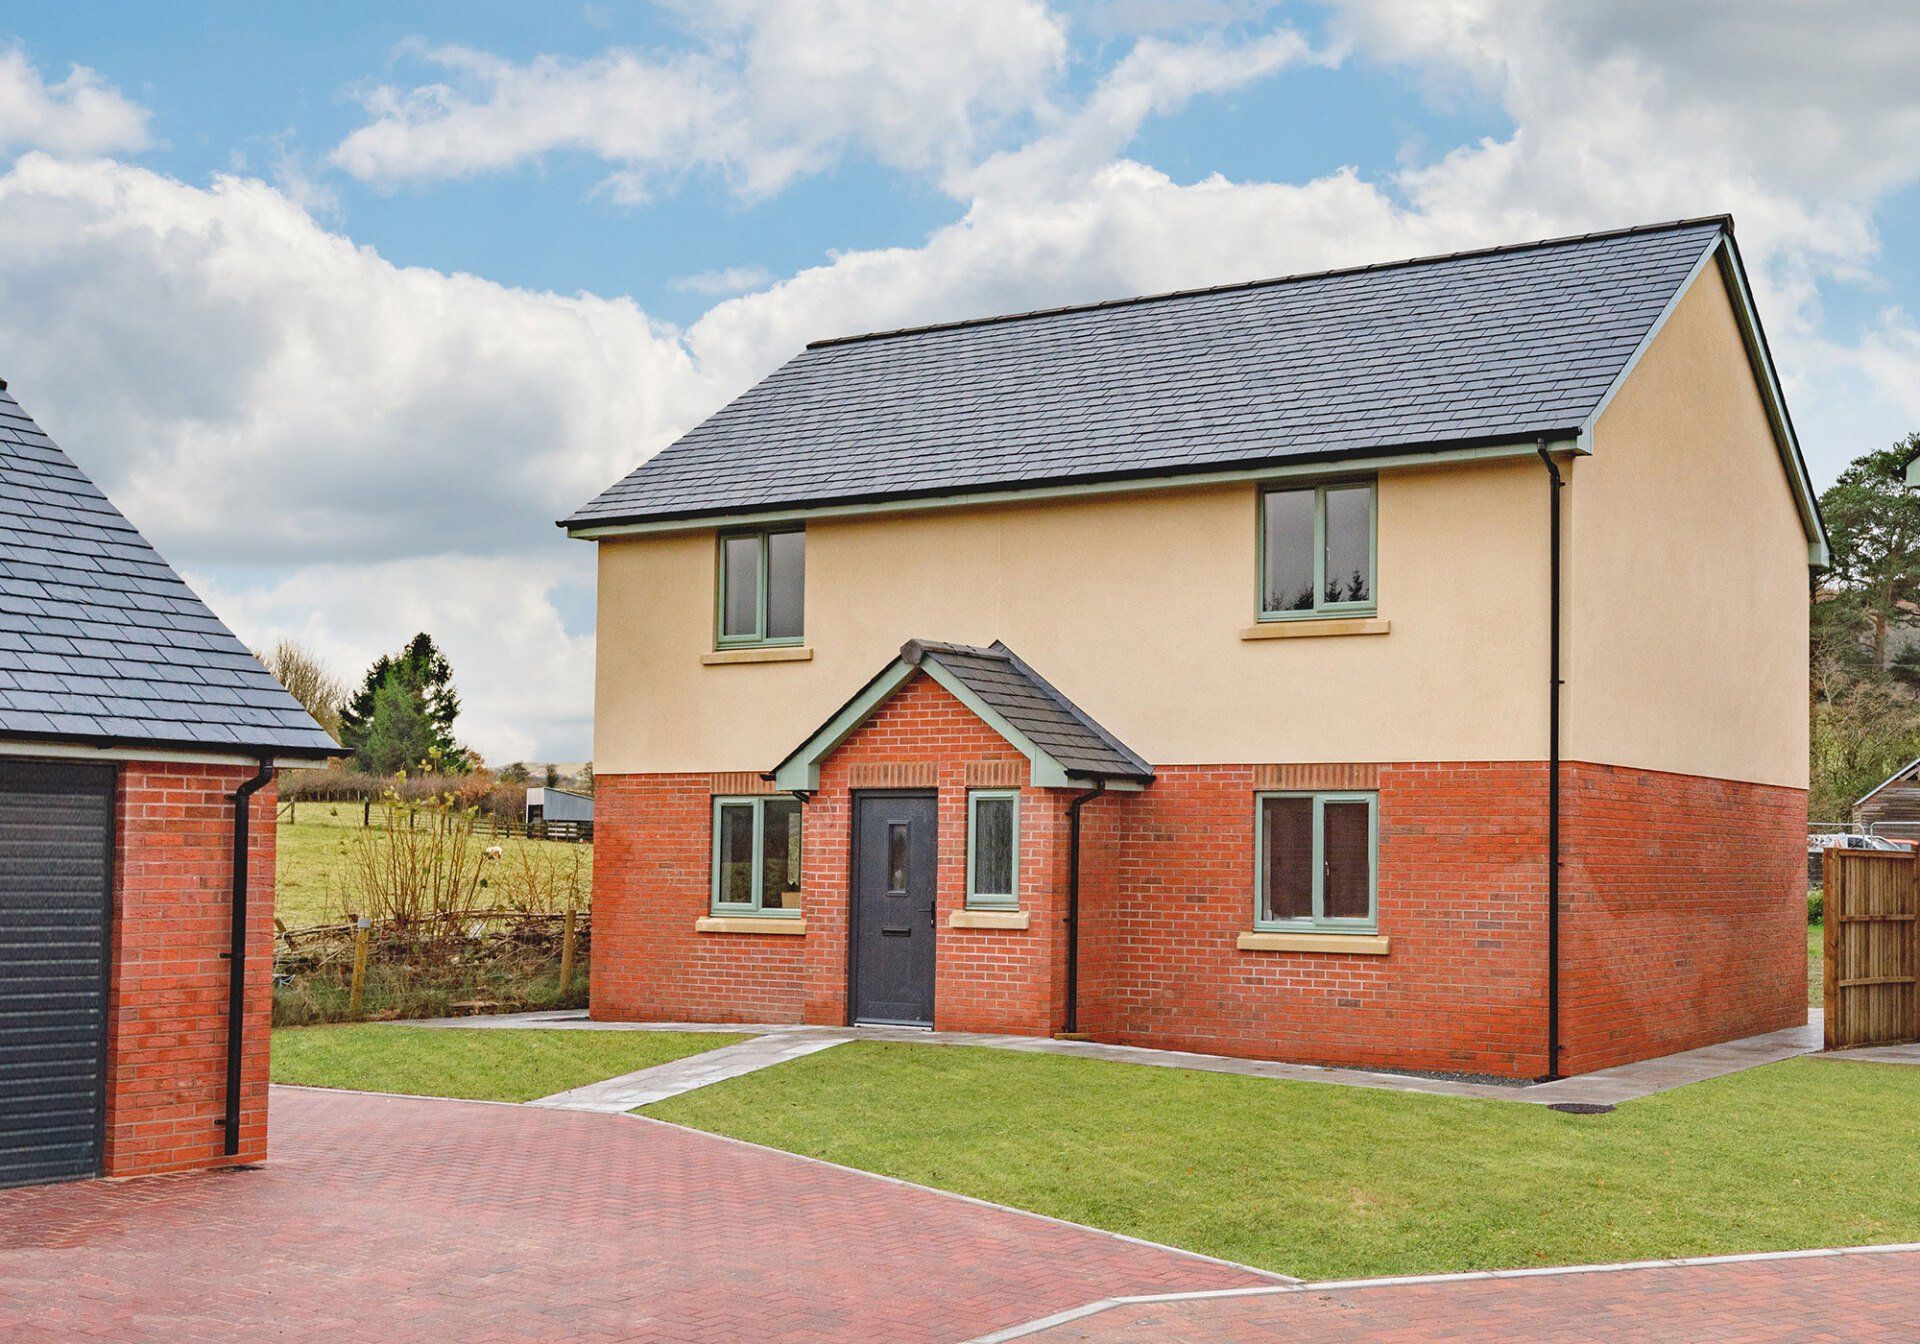 External view of Tretower (plot 1), a 4-bed detached property at Y Maes, Beulah.